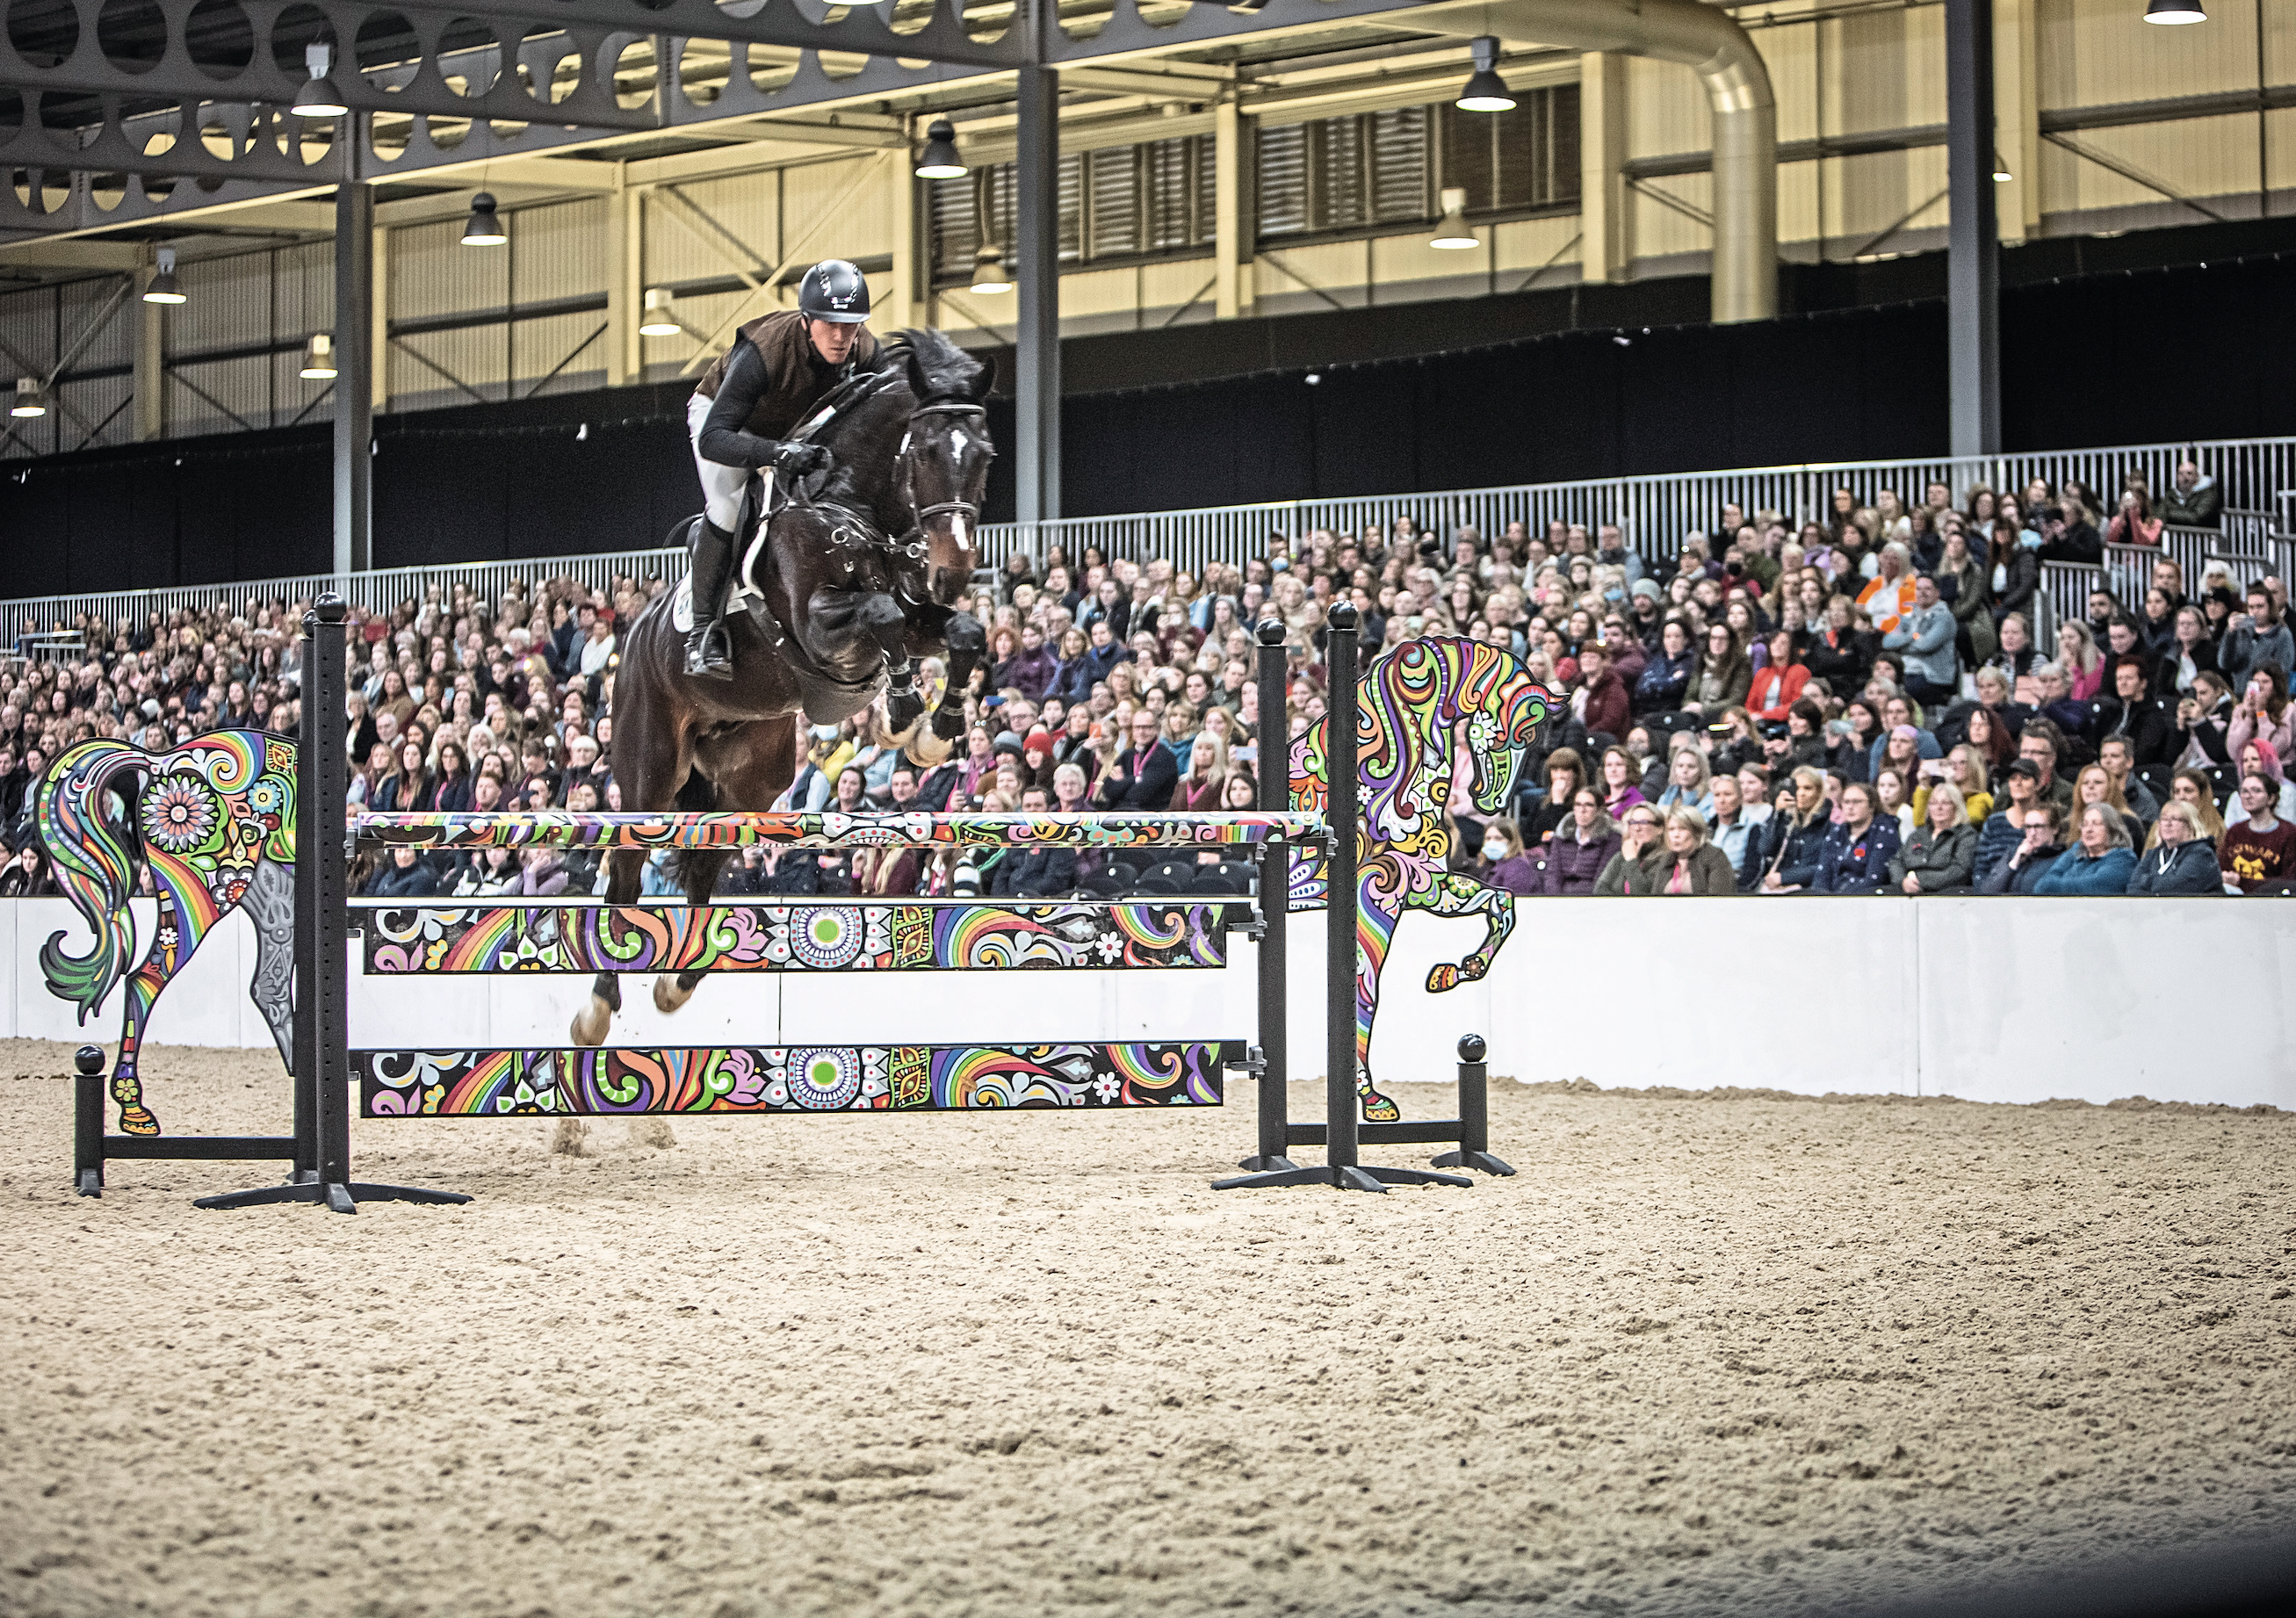 Win VIP tickets to Your Horse Live and the chance to meet Oliver Townend and Geoff Billington